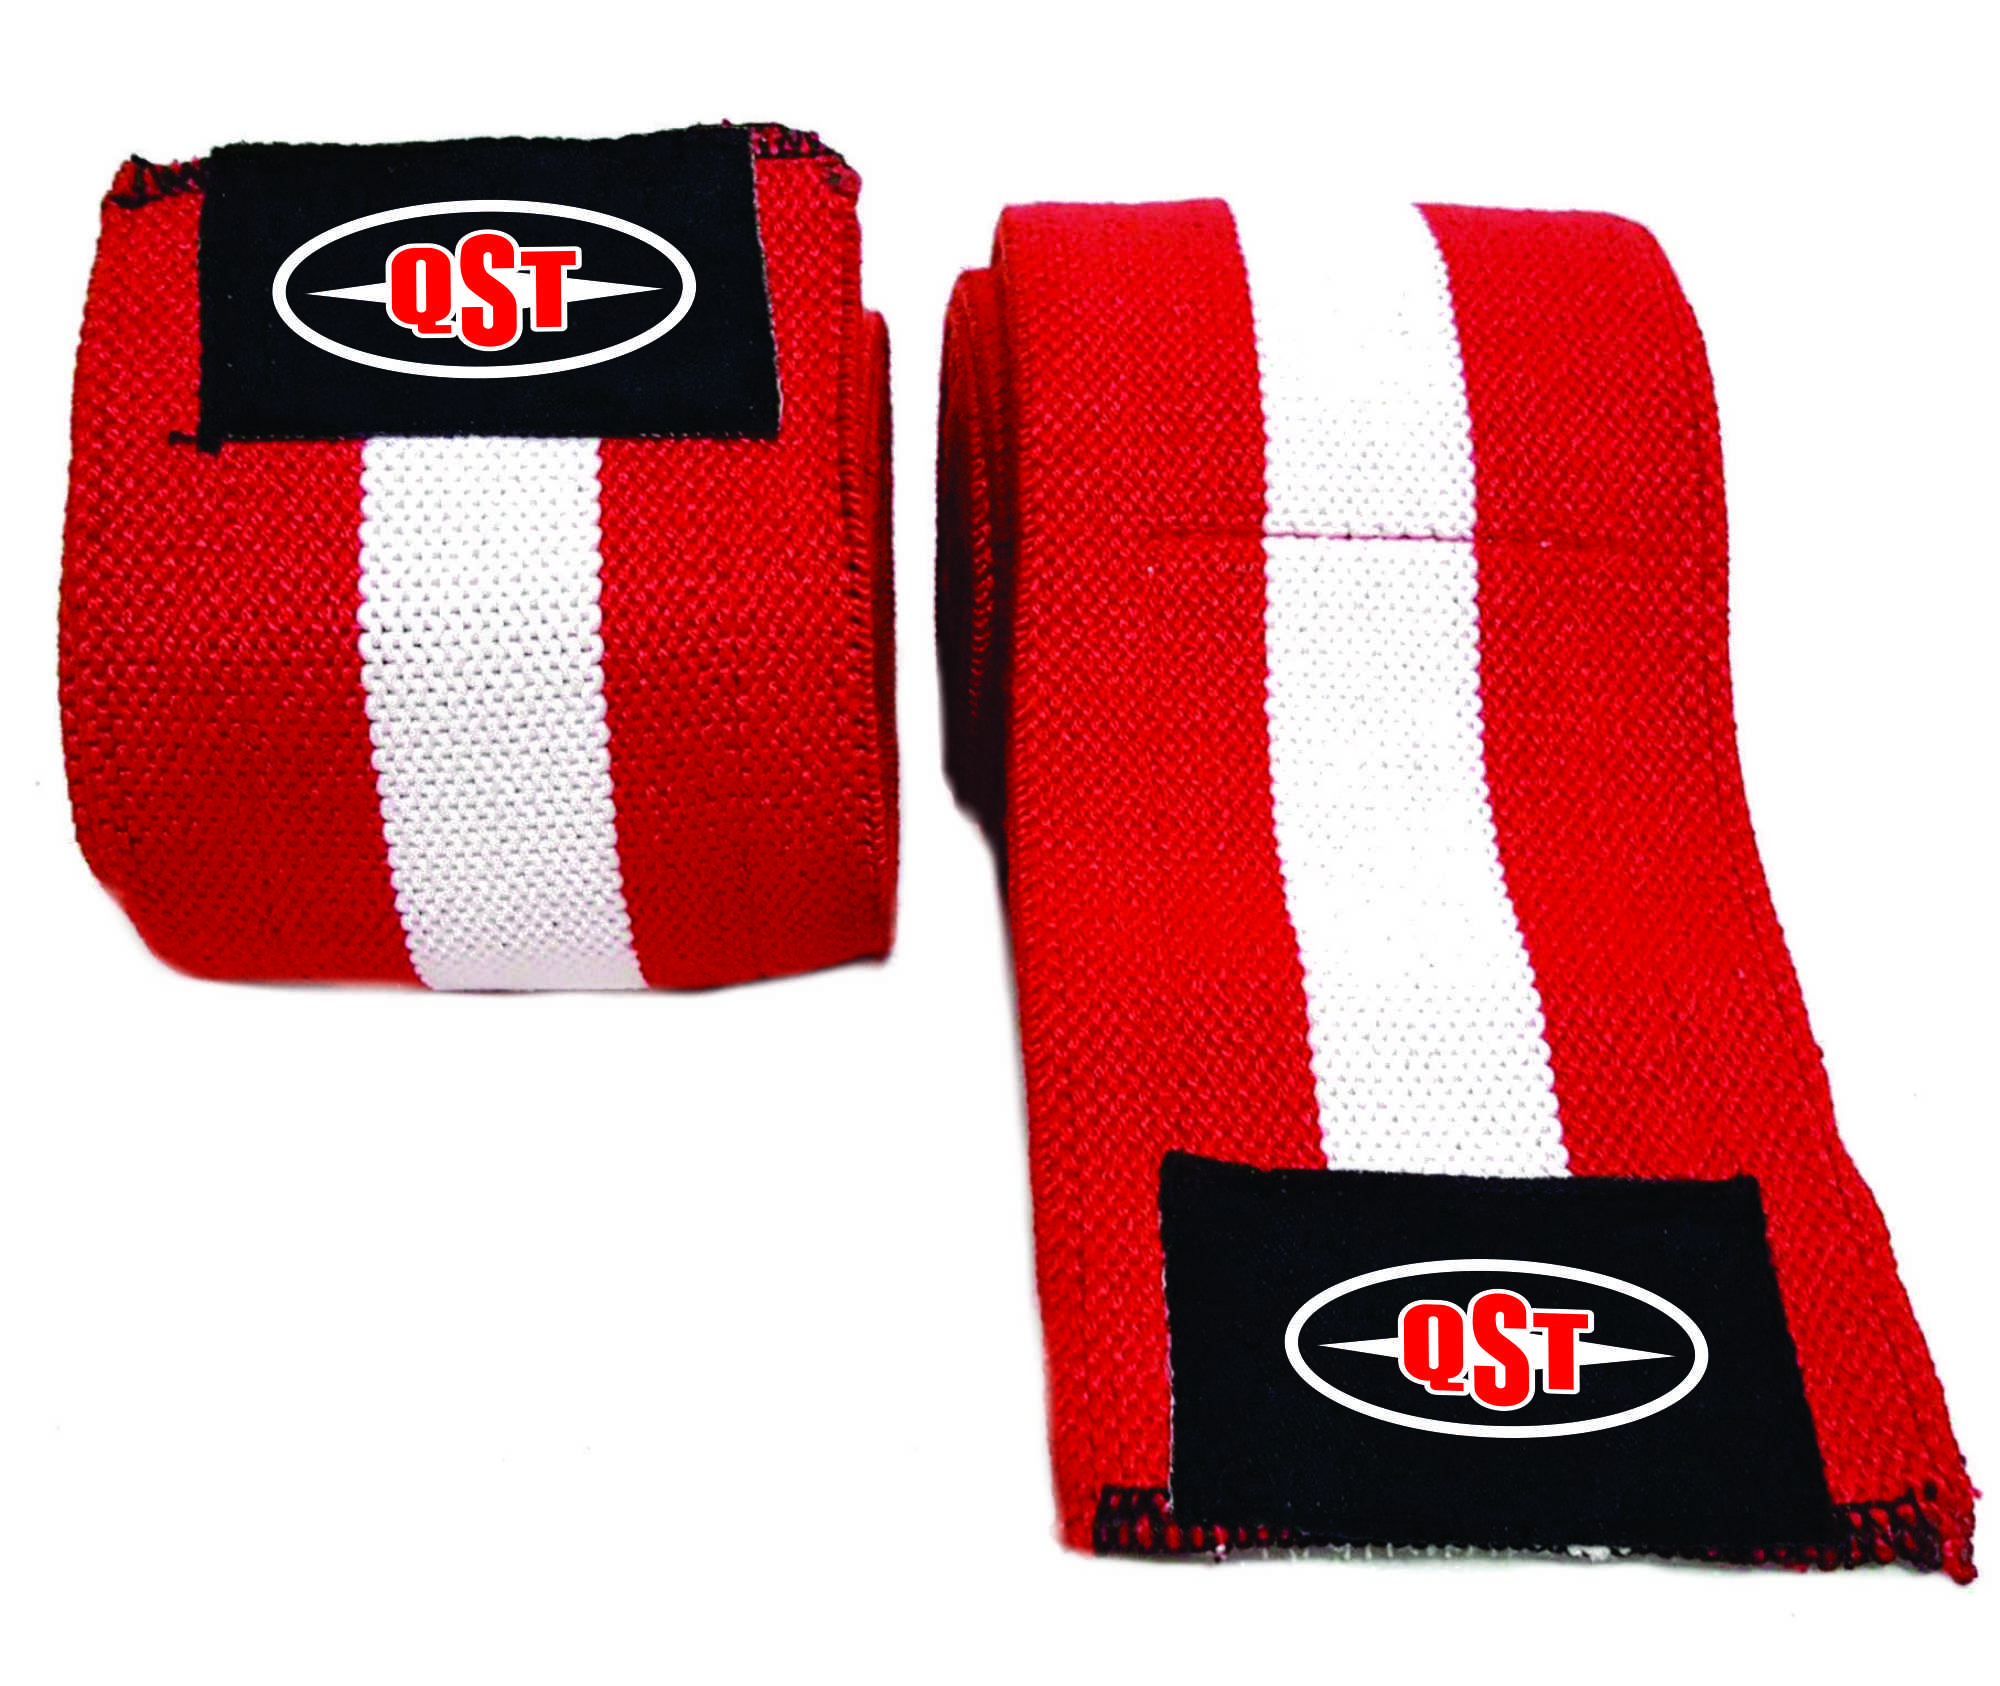 Weightlifting Knee Wraps - ACS-1526